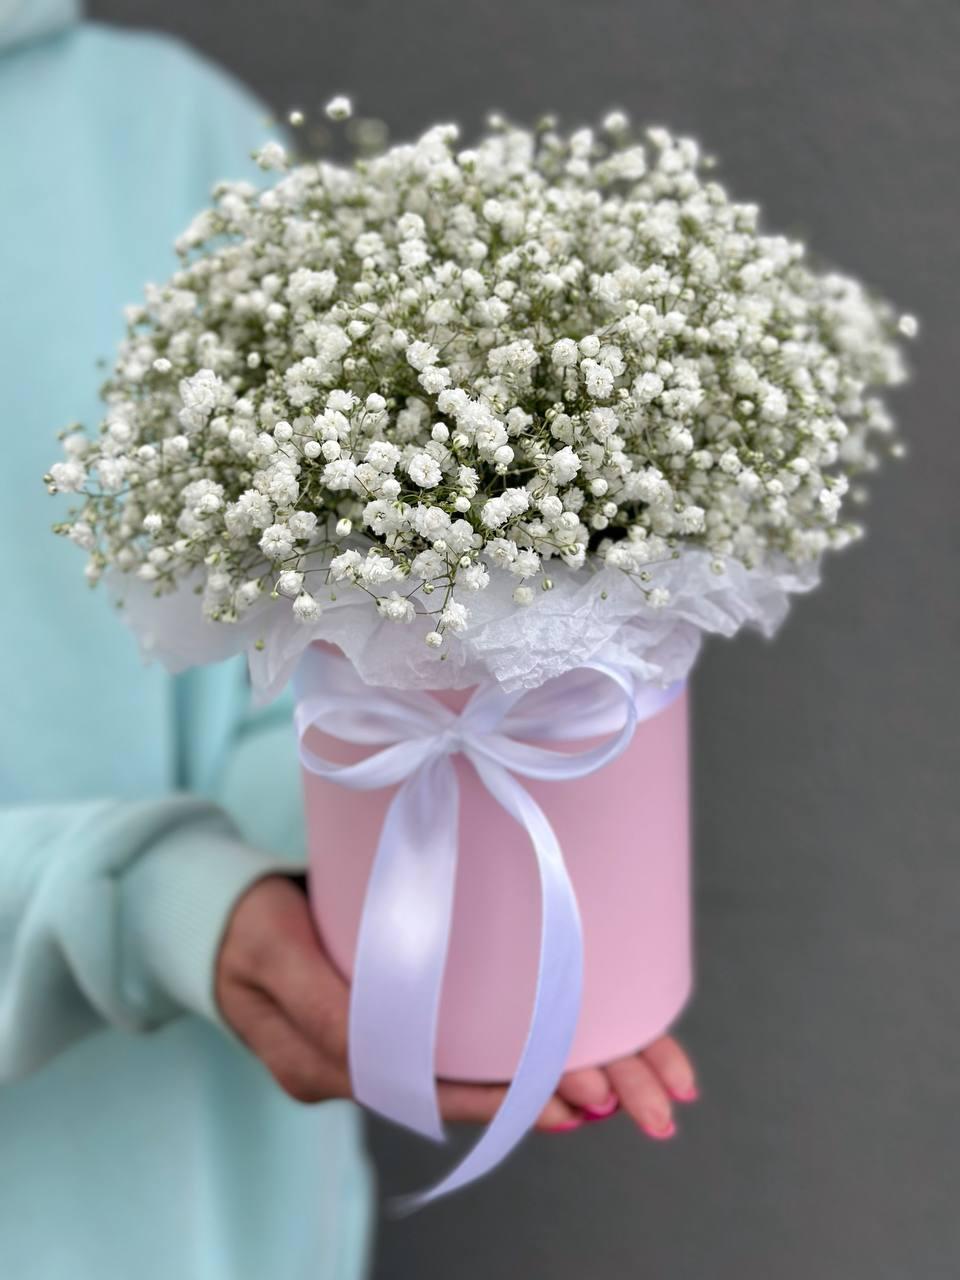 Box of gypsophila "White in pink"